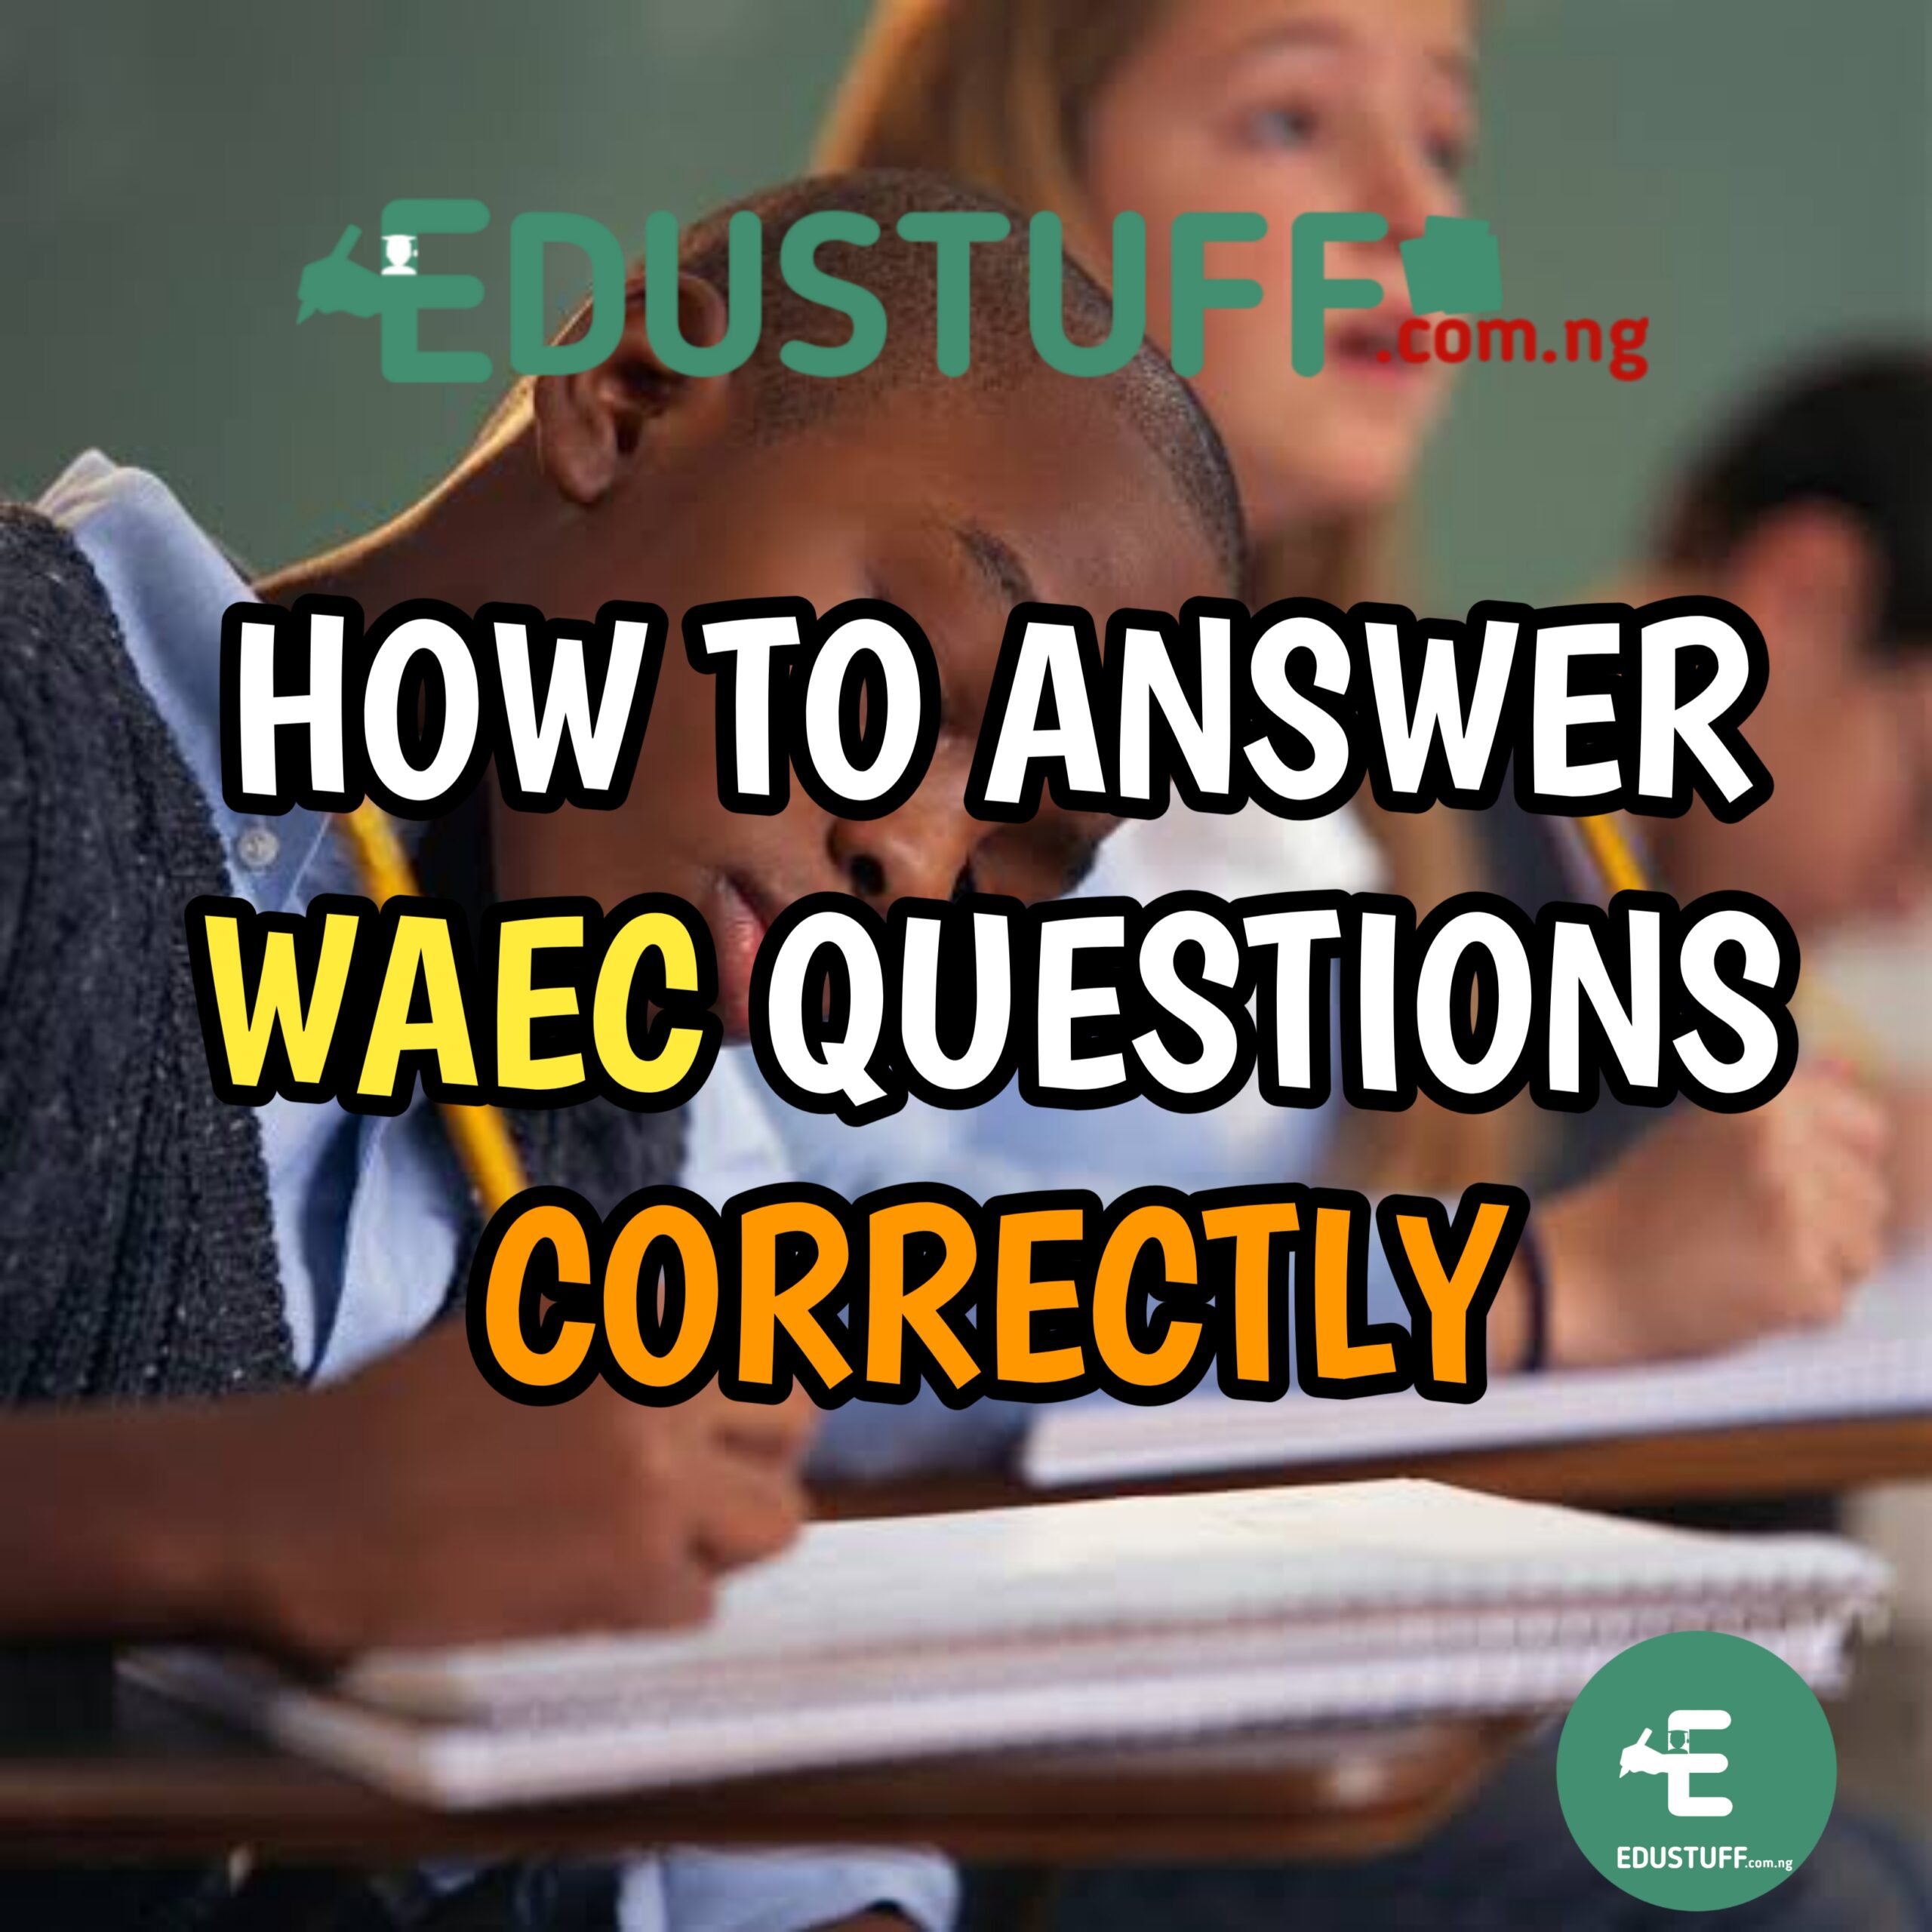 How To Answer WAEC Questions